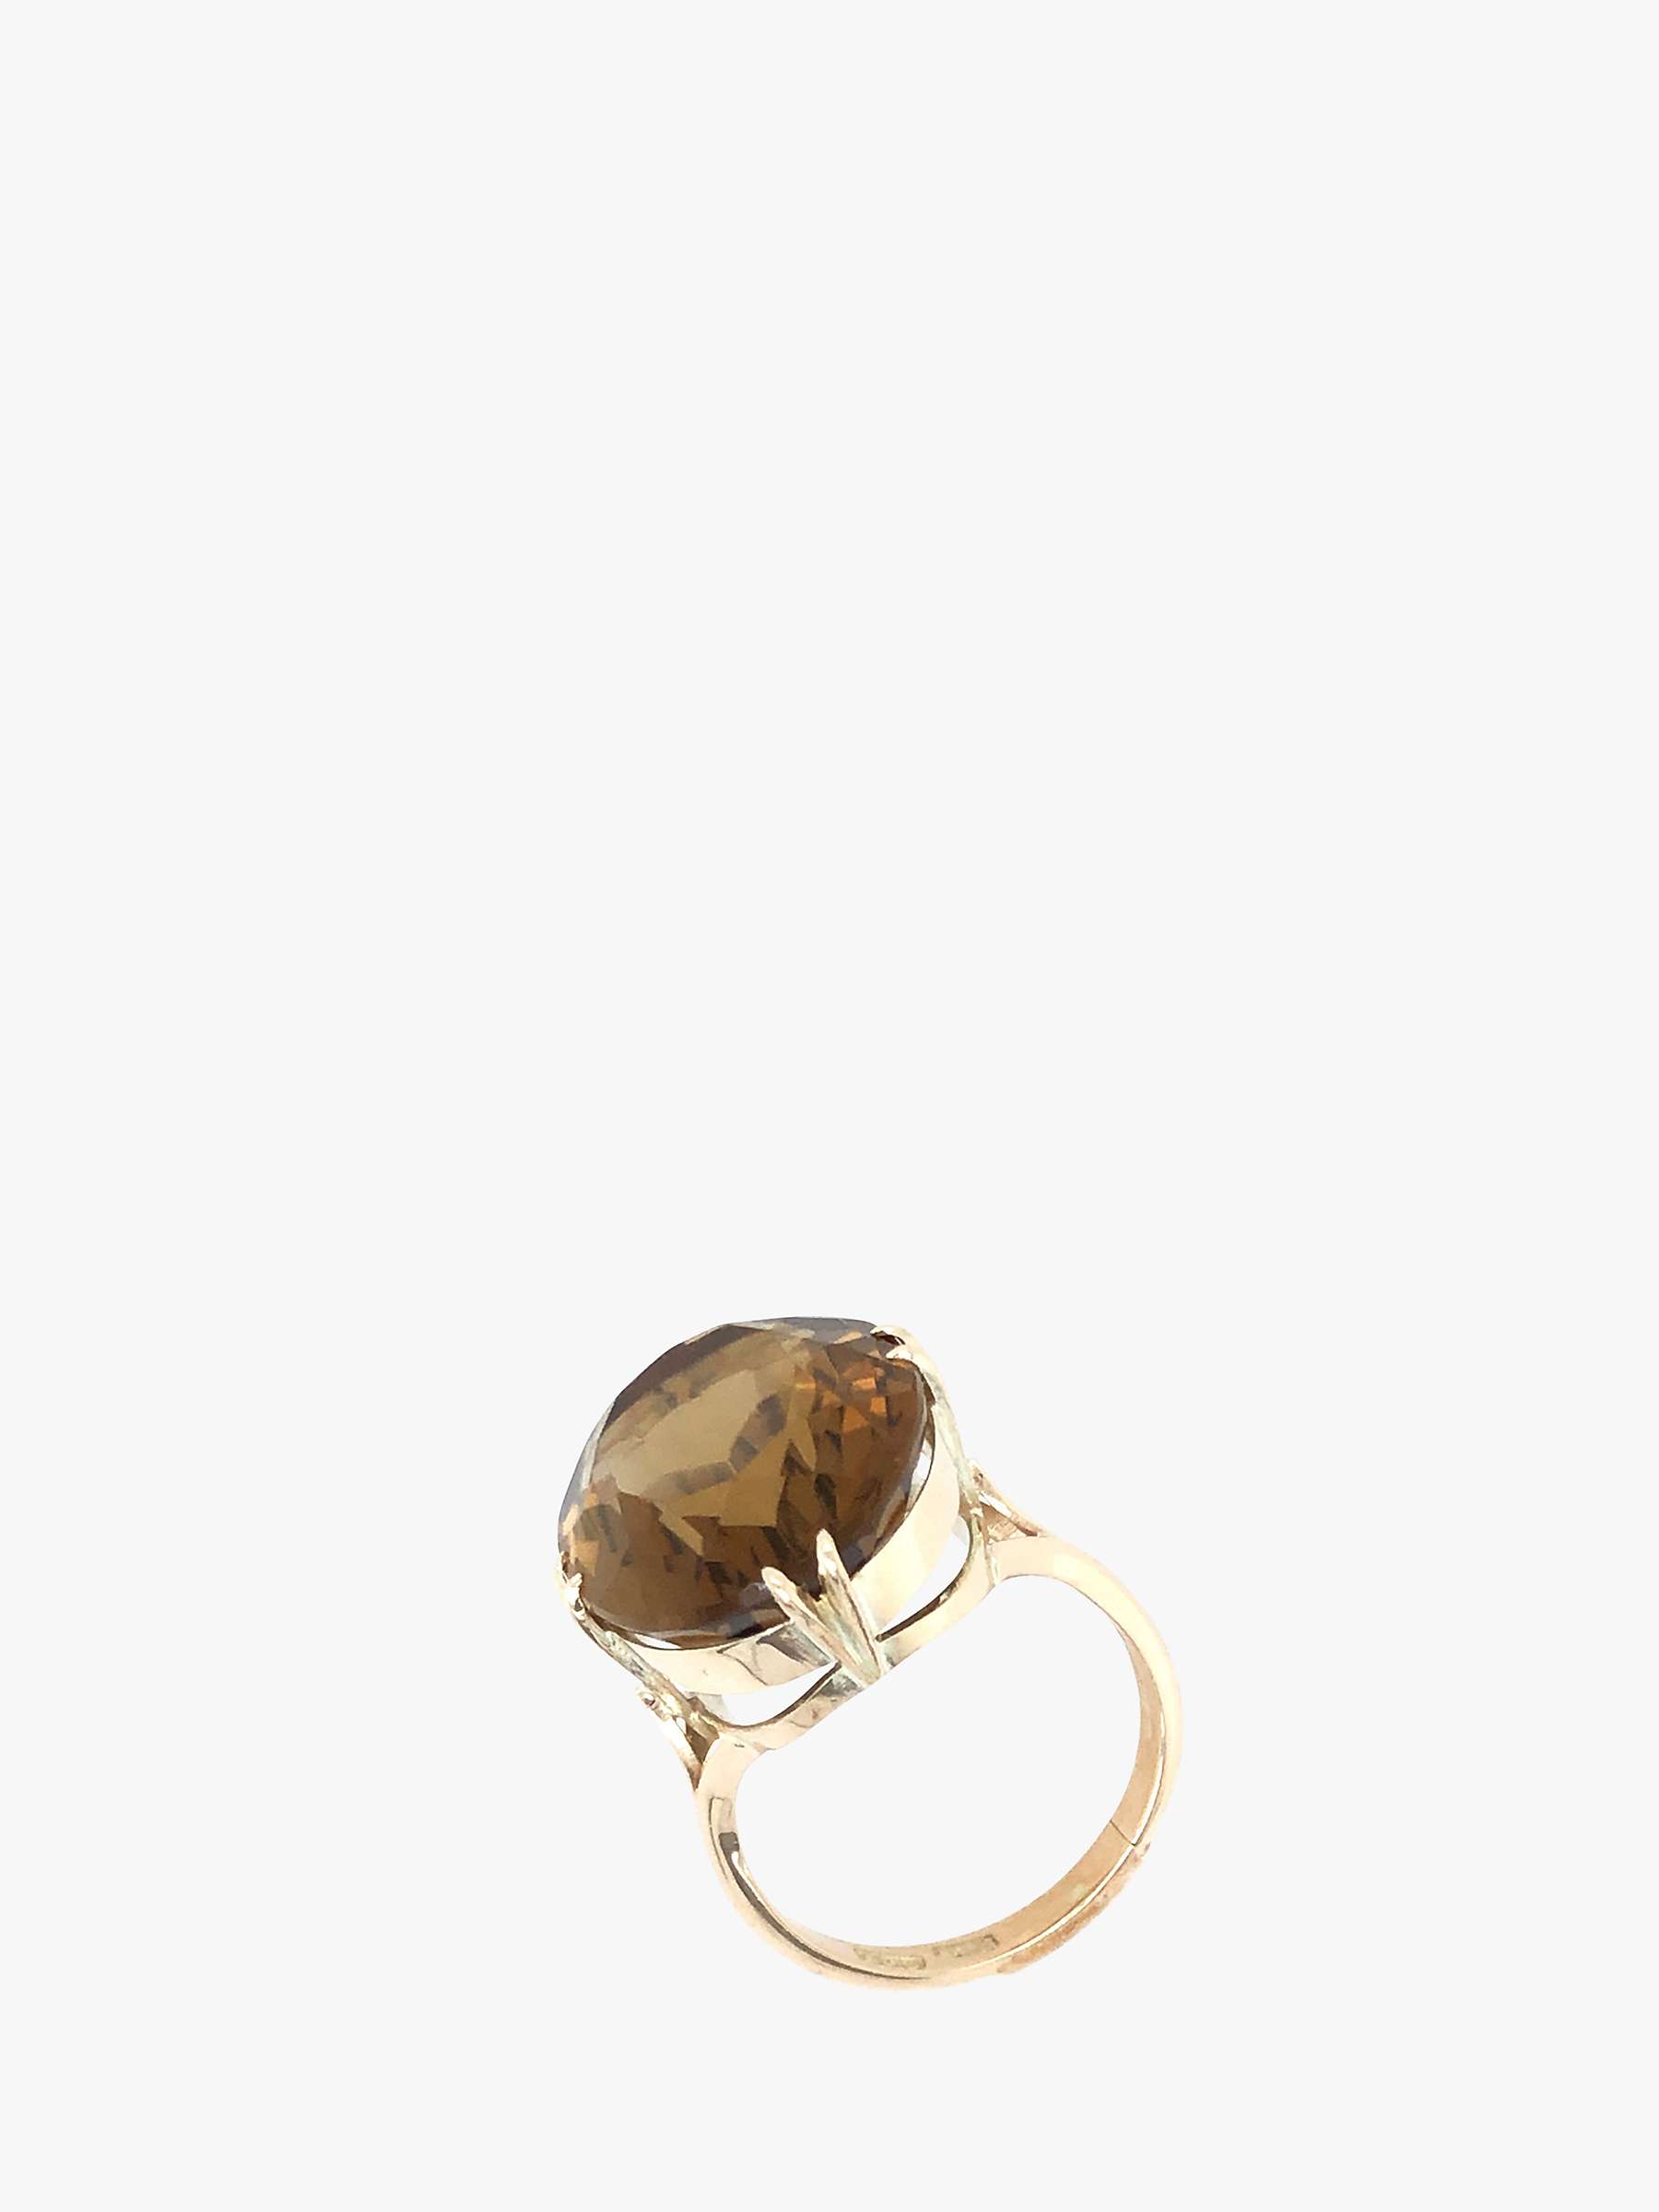 Buy VF Jewellery 9ct Yellow Gold Smoky Quartz Second Hand Ring Online at johnlewis.com